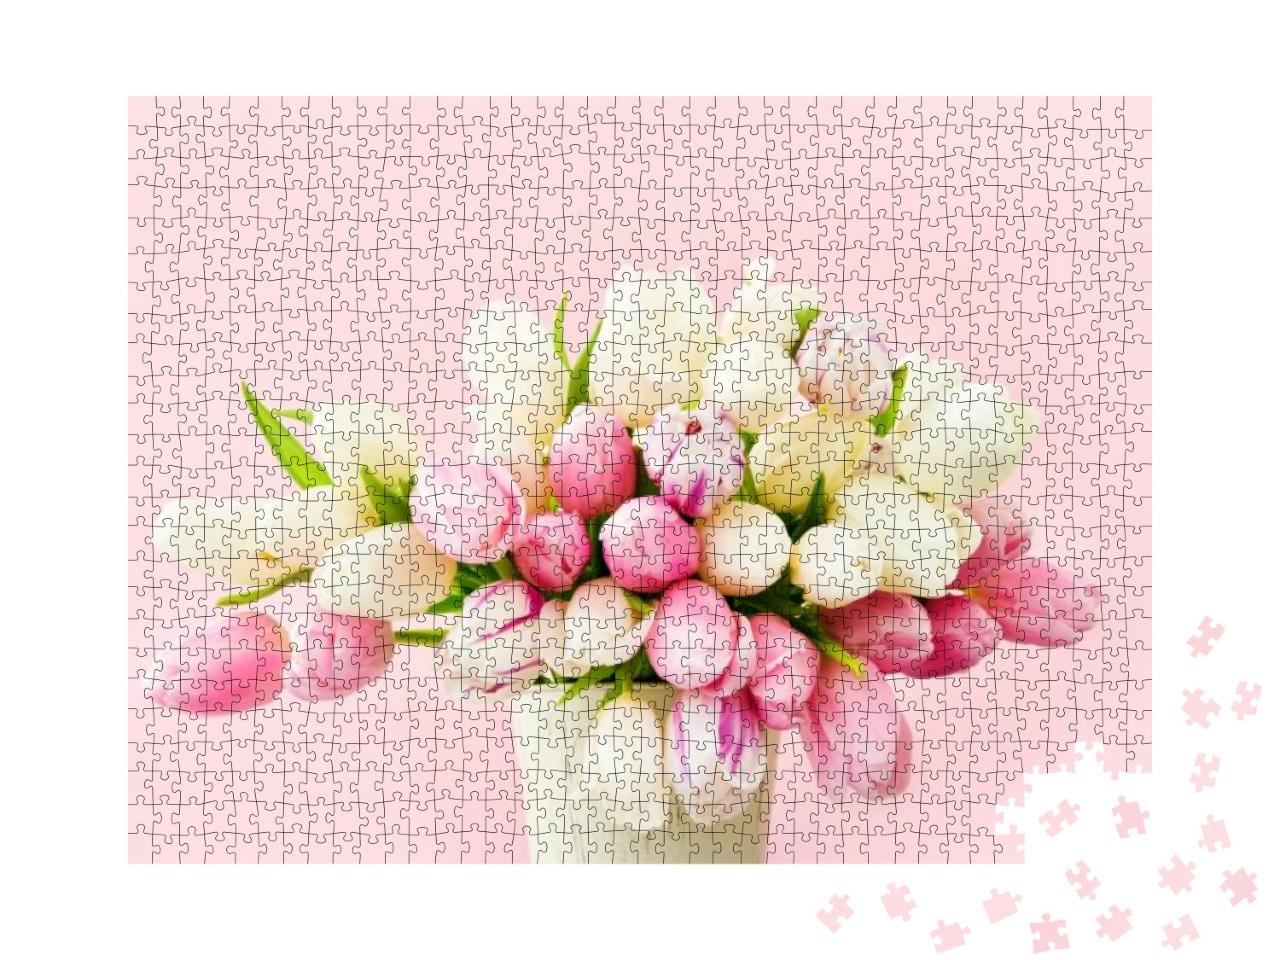 Pink & White Tulips Bouquet in Vase on a Pink Background... Jigsaw Puzzle with 1000 pieces